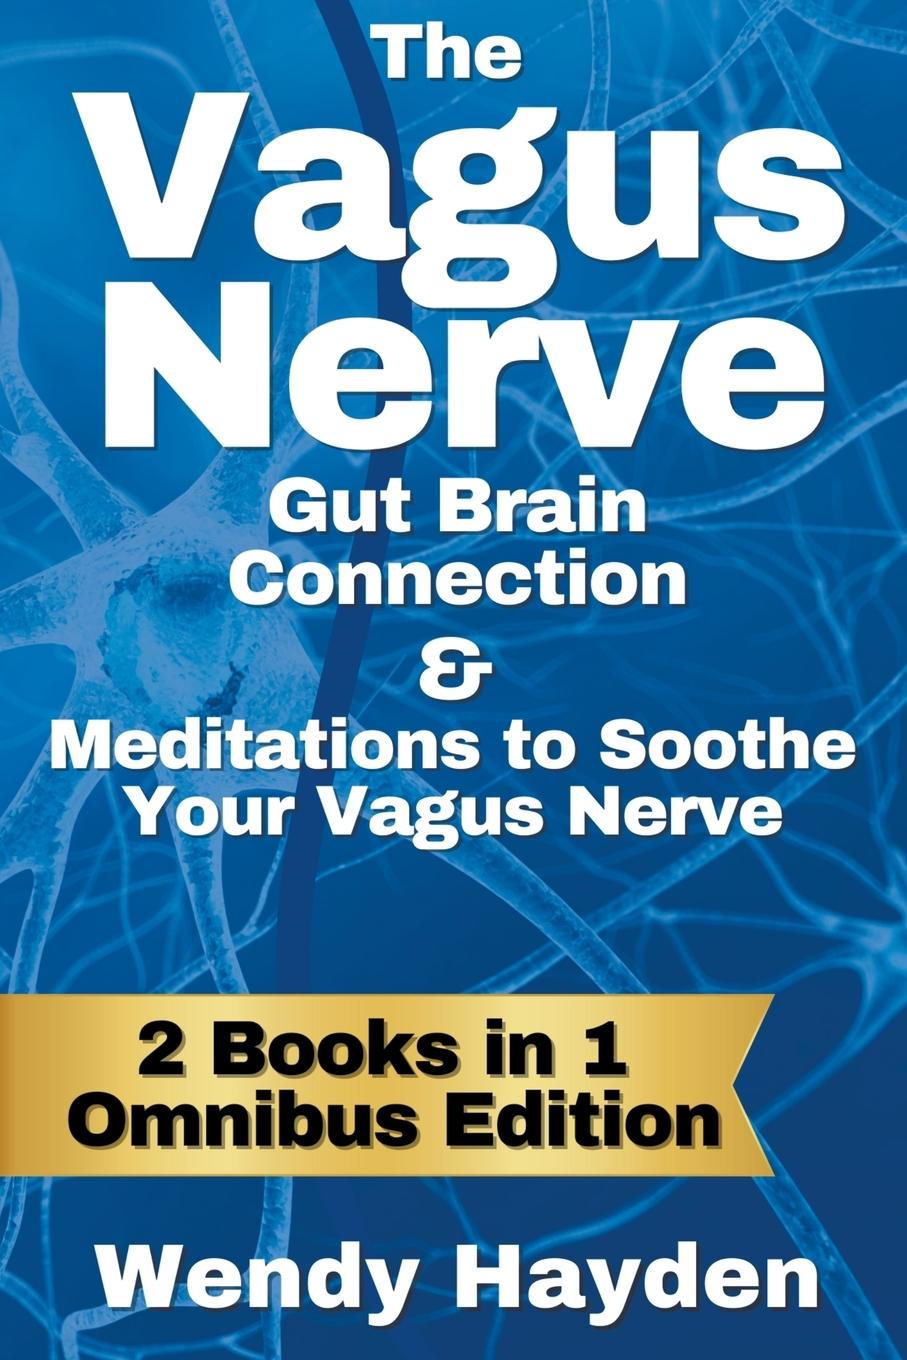 Book The Vagus Nerve Gut Brain Connection & Meditations to Soothe Your Vagus Nerve 